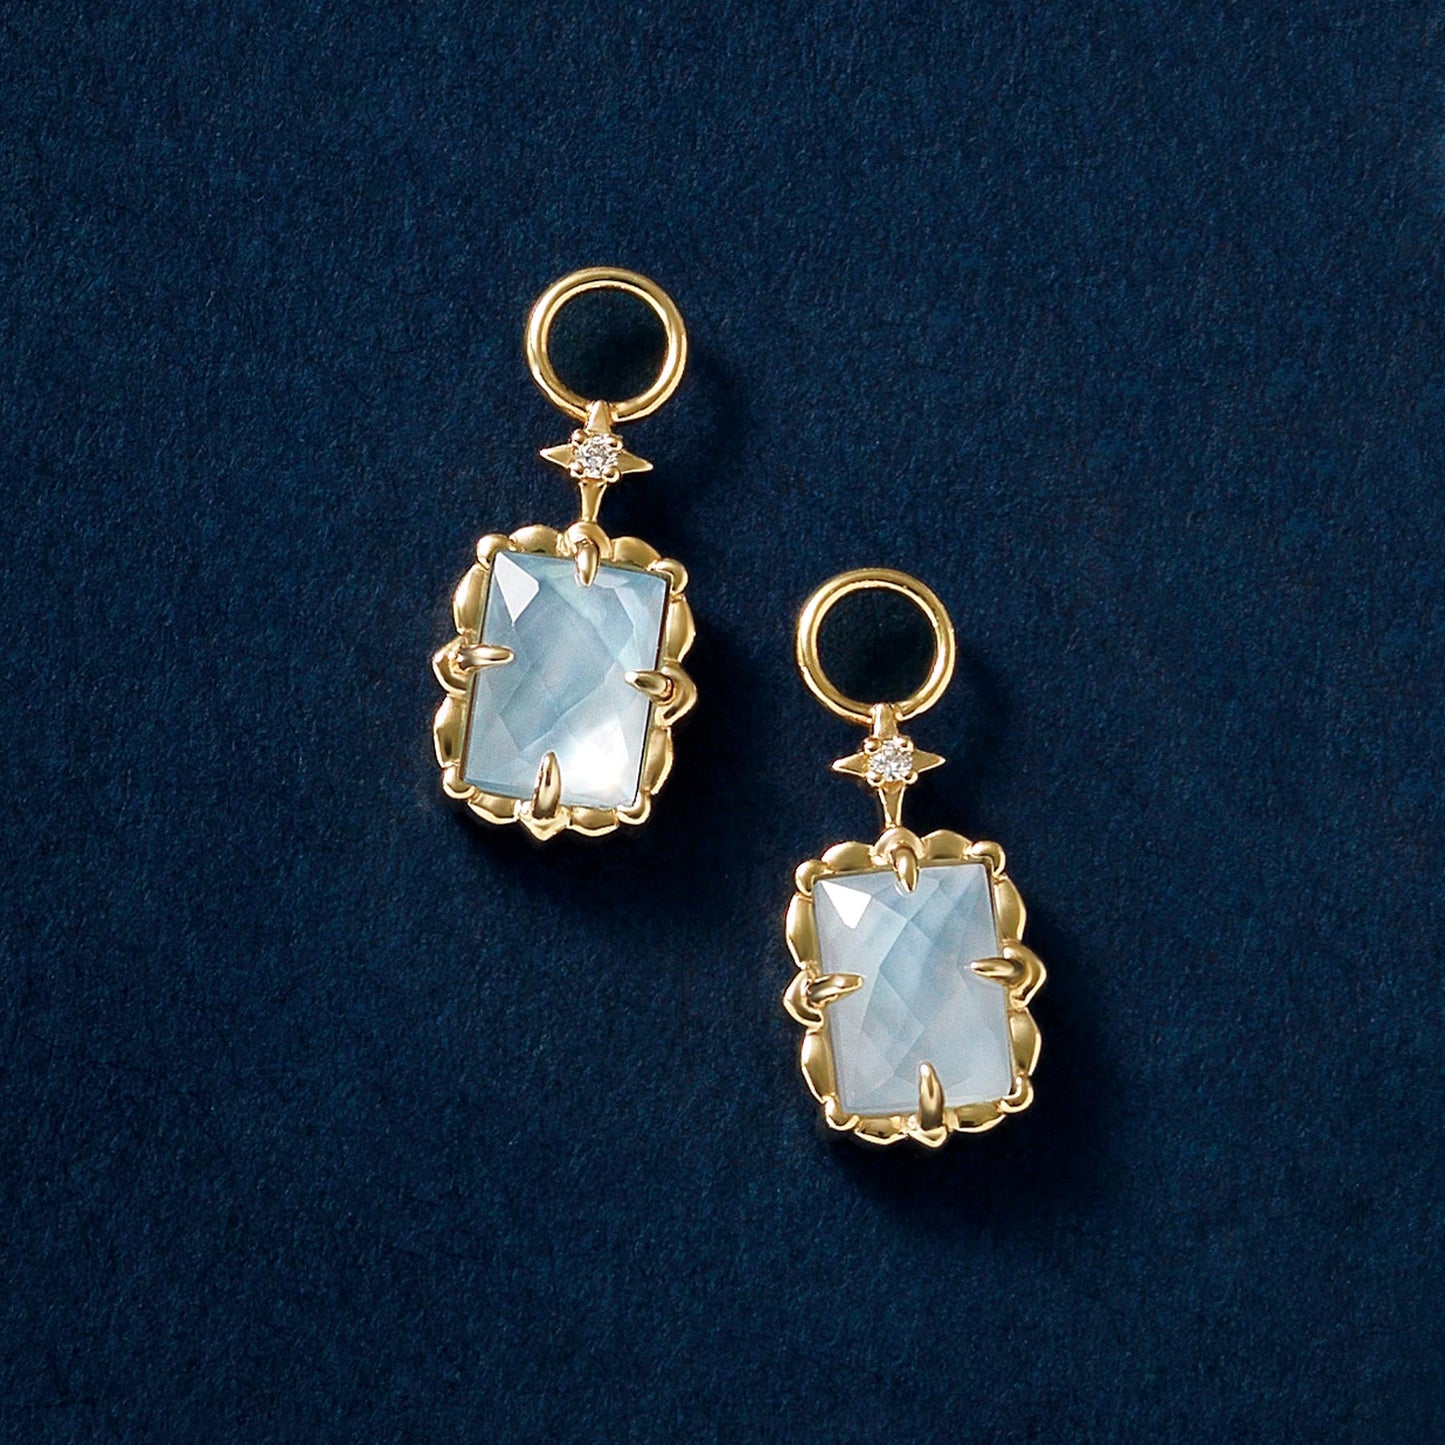 10K Blue Topaz "Crystal" Charms (Yellow Gold) - Product Image